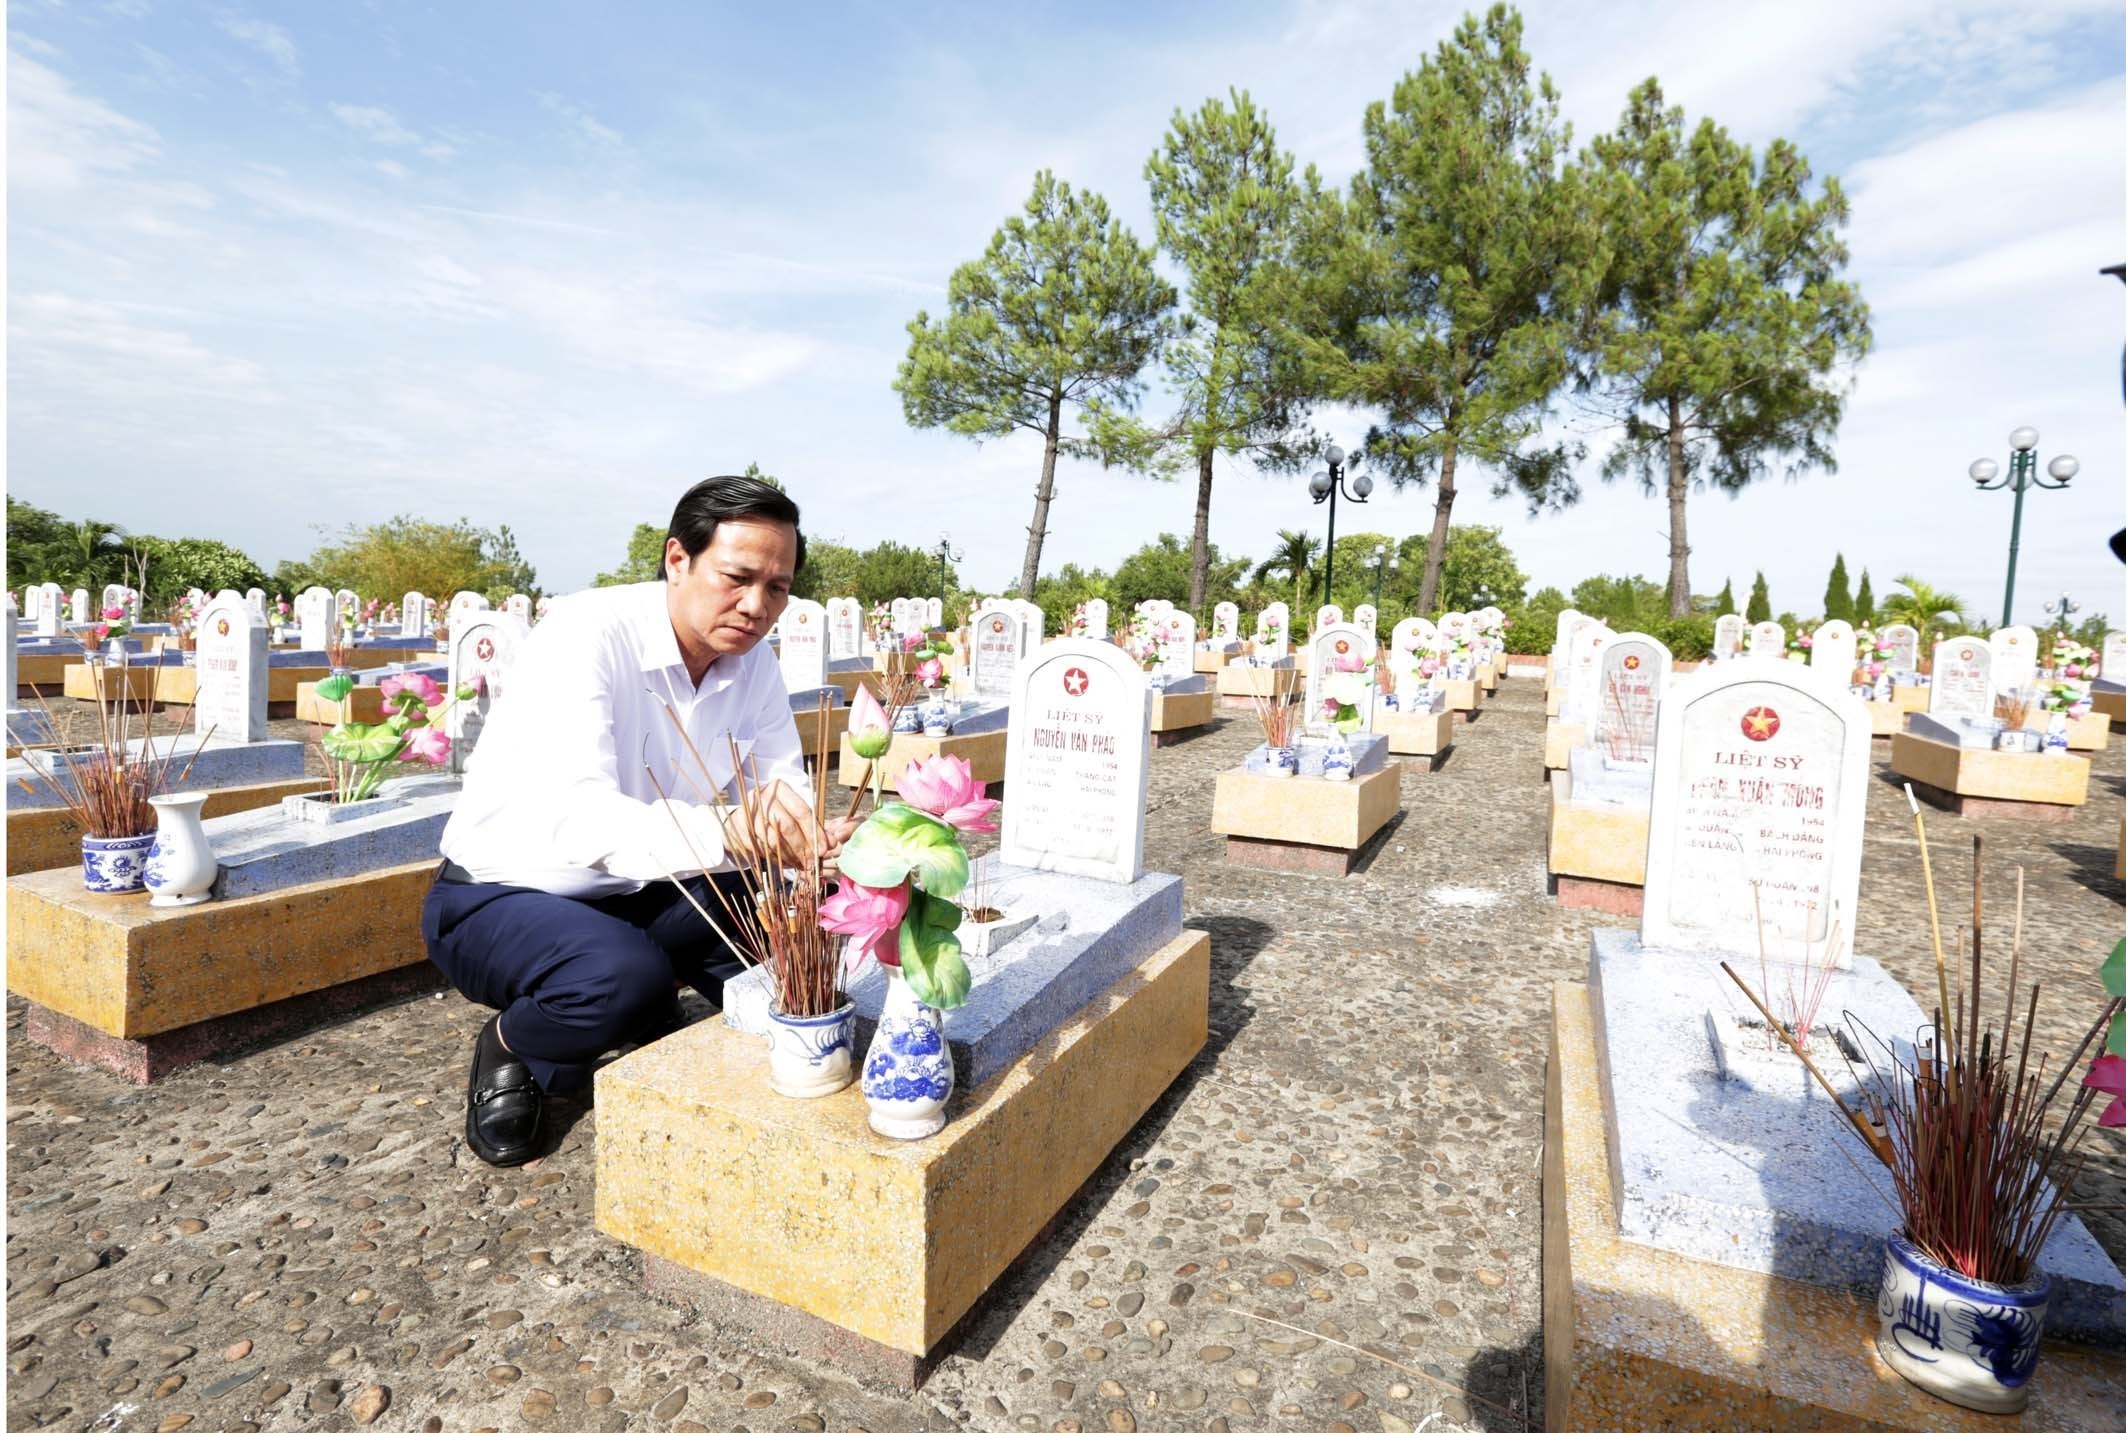 Minister of Labour, Invalids and Social Affairs Dao Ngoc Dung offers incense to pay respect to martyrs at the Truong Son National Martyrs’ Cemetery (Photo: VNA)